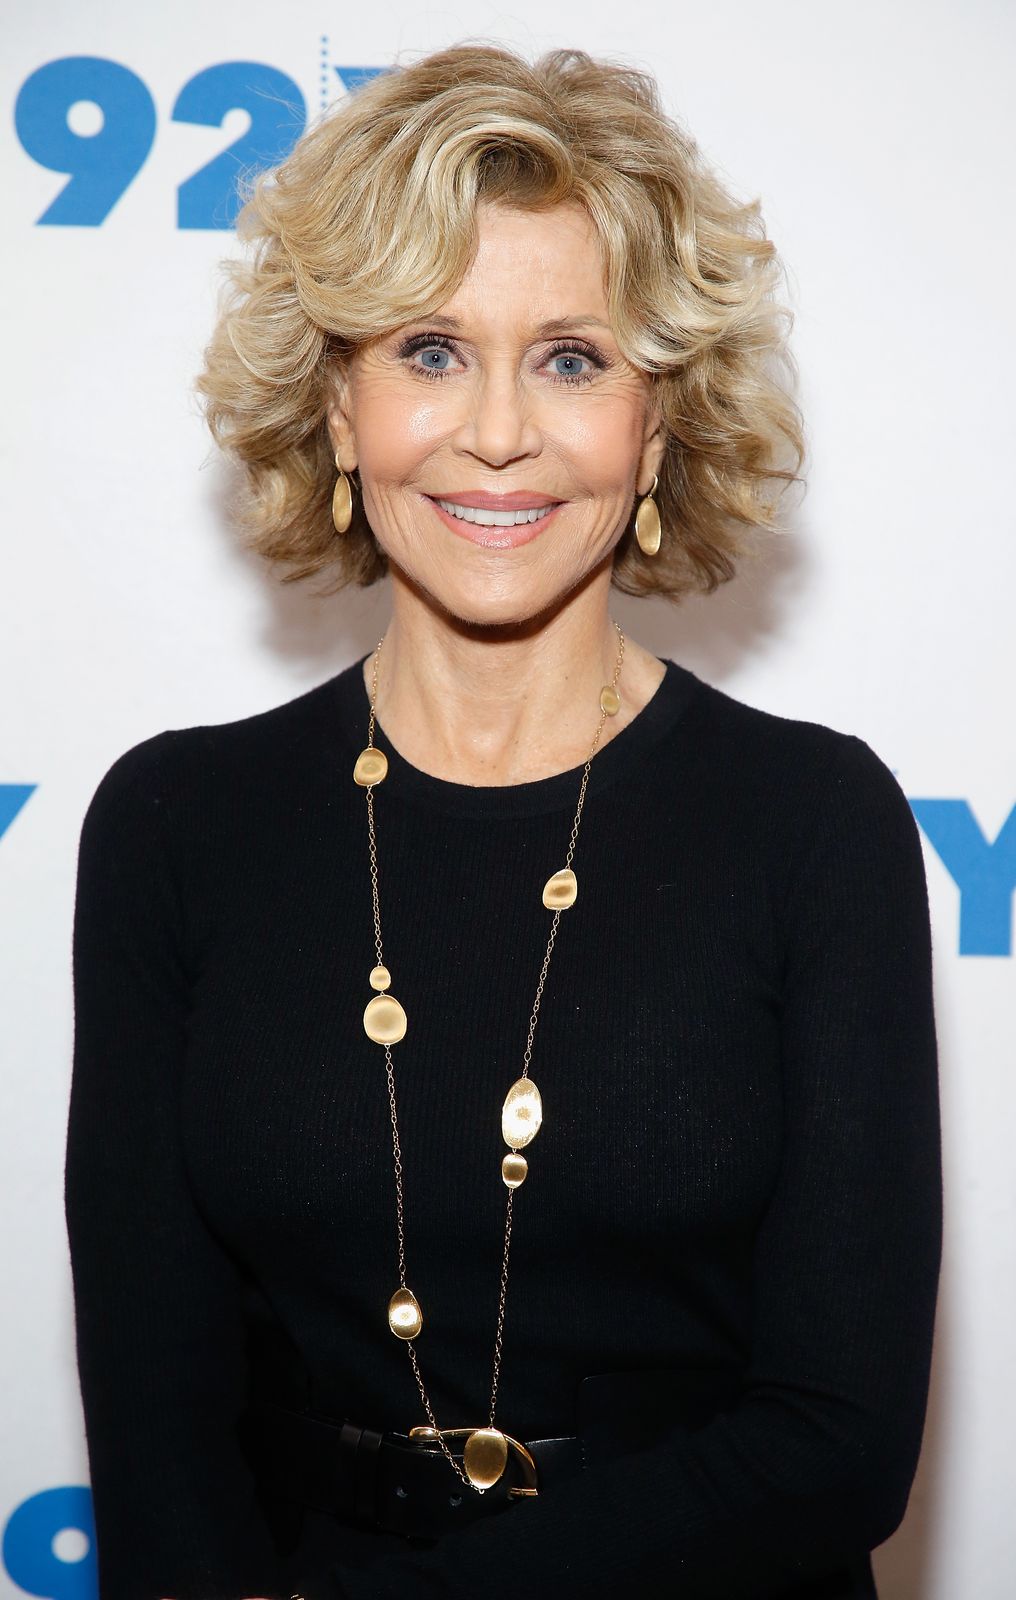 Jane Fonda poses during a conversation with Susan Lacy at the 92nd Street Y on September 21, 2018, in New York City | Source: Getty Images